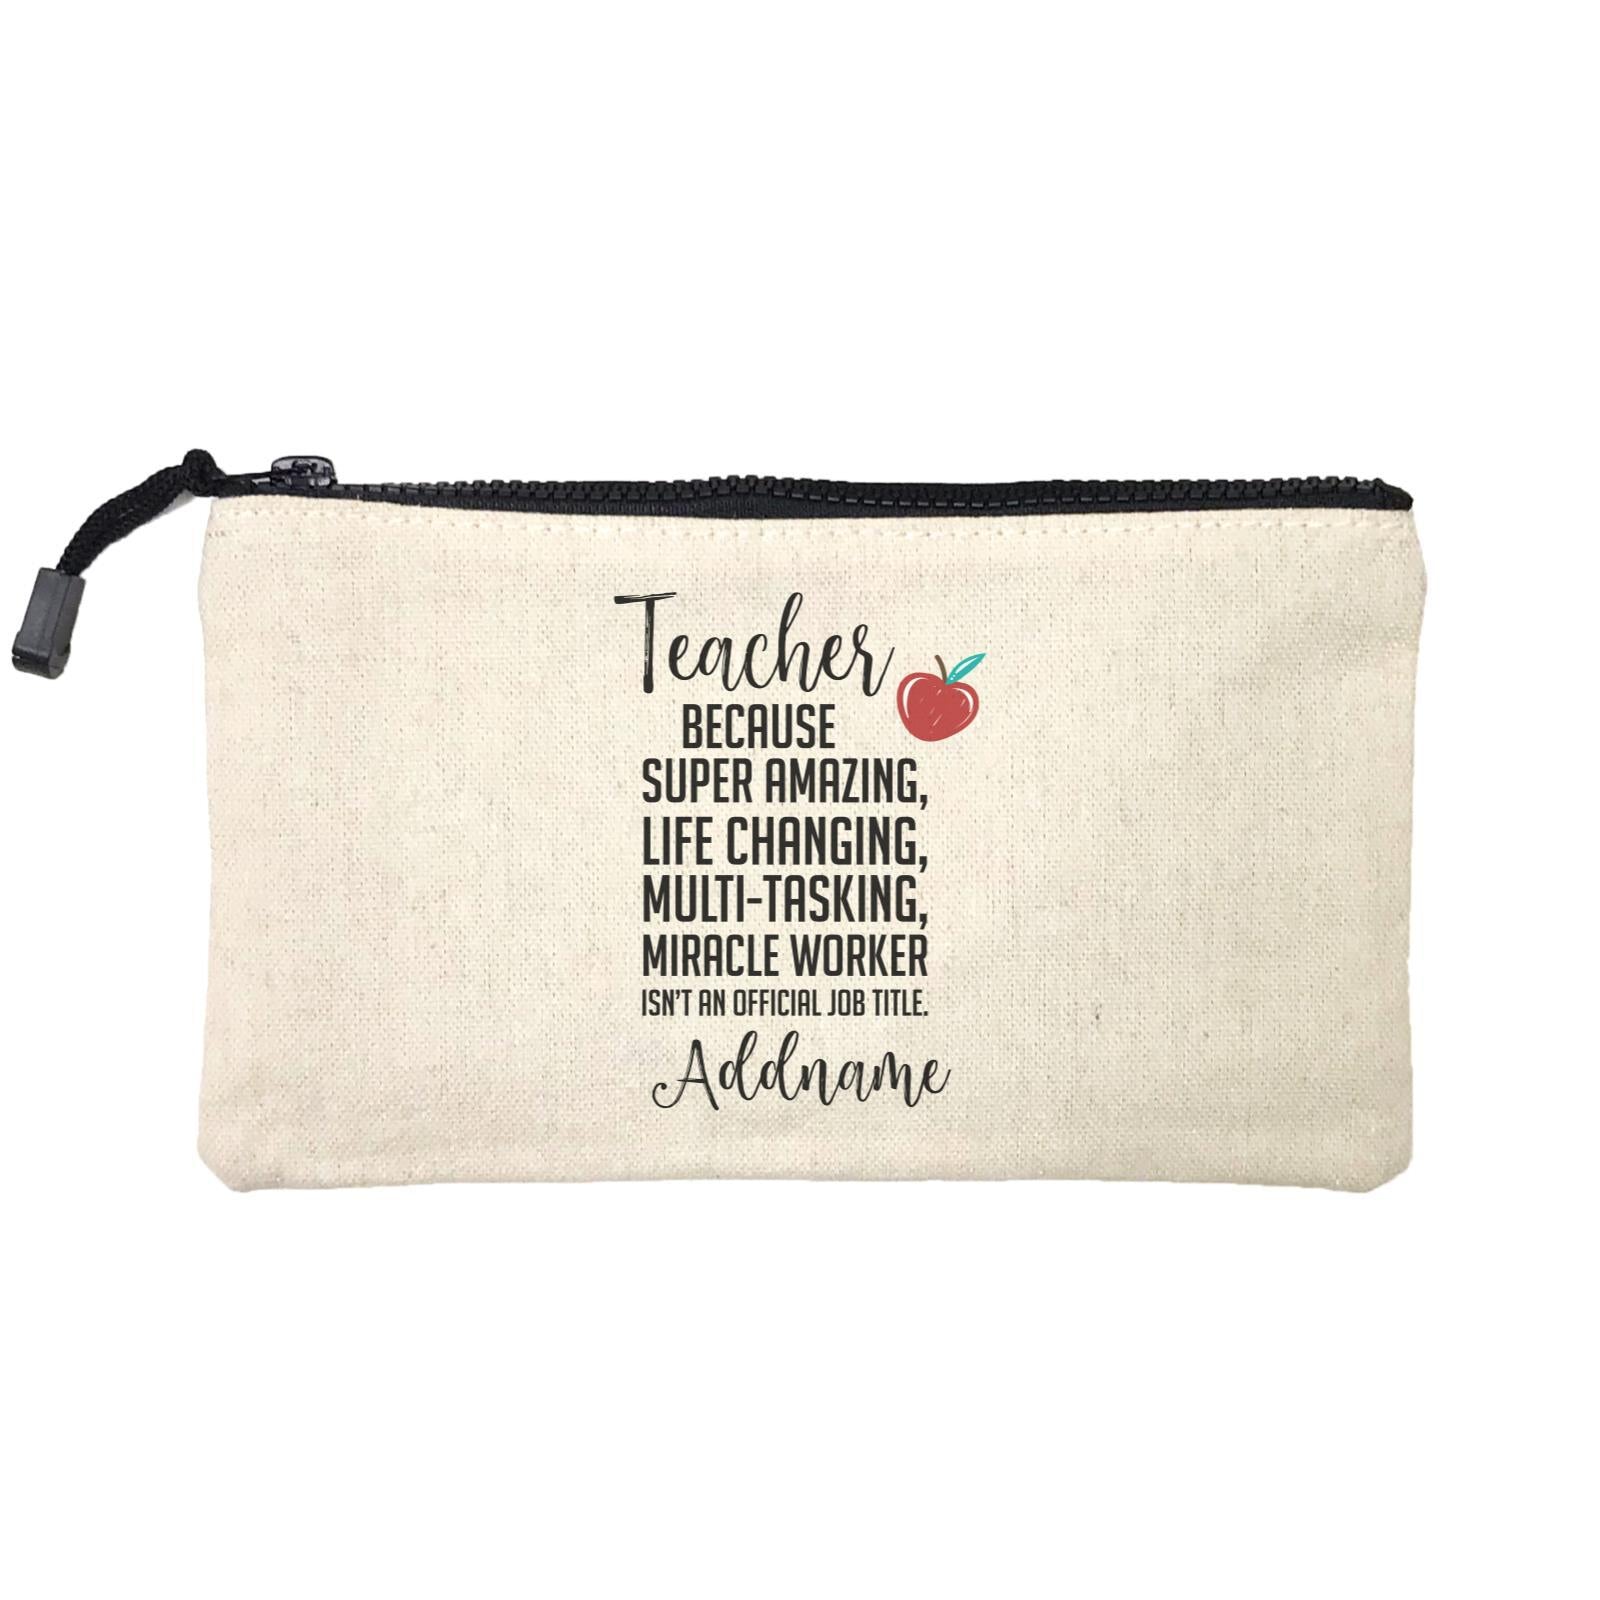 Teacher Quotes Teacher Miracle Worker Isn't An Official Job Title Addname Mini Accessories Stationery Pouch